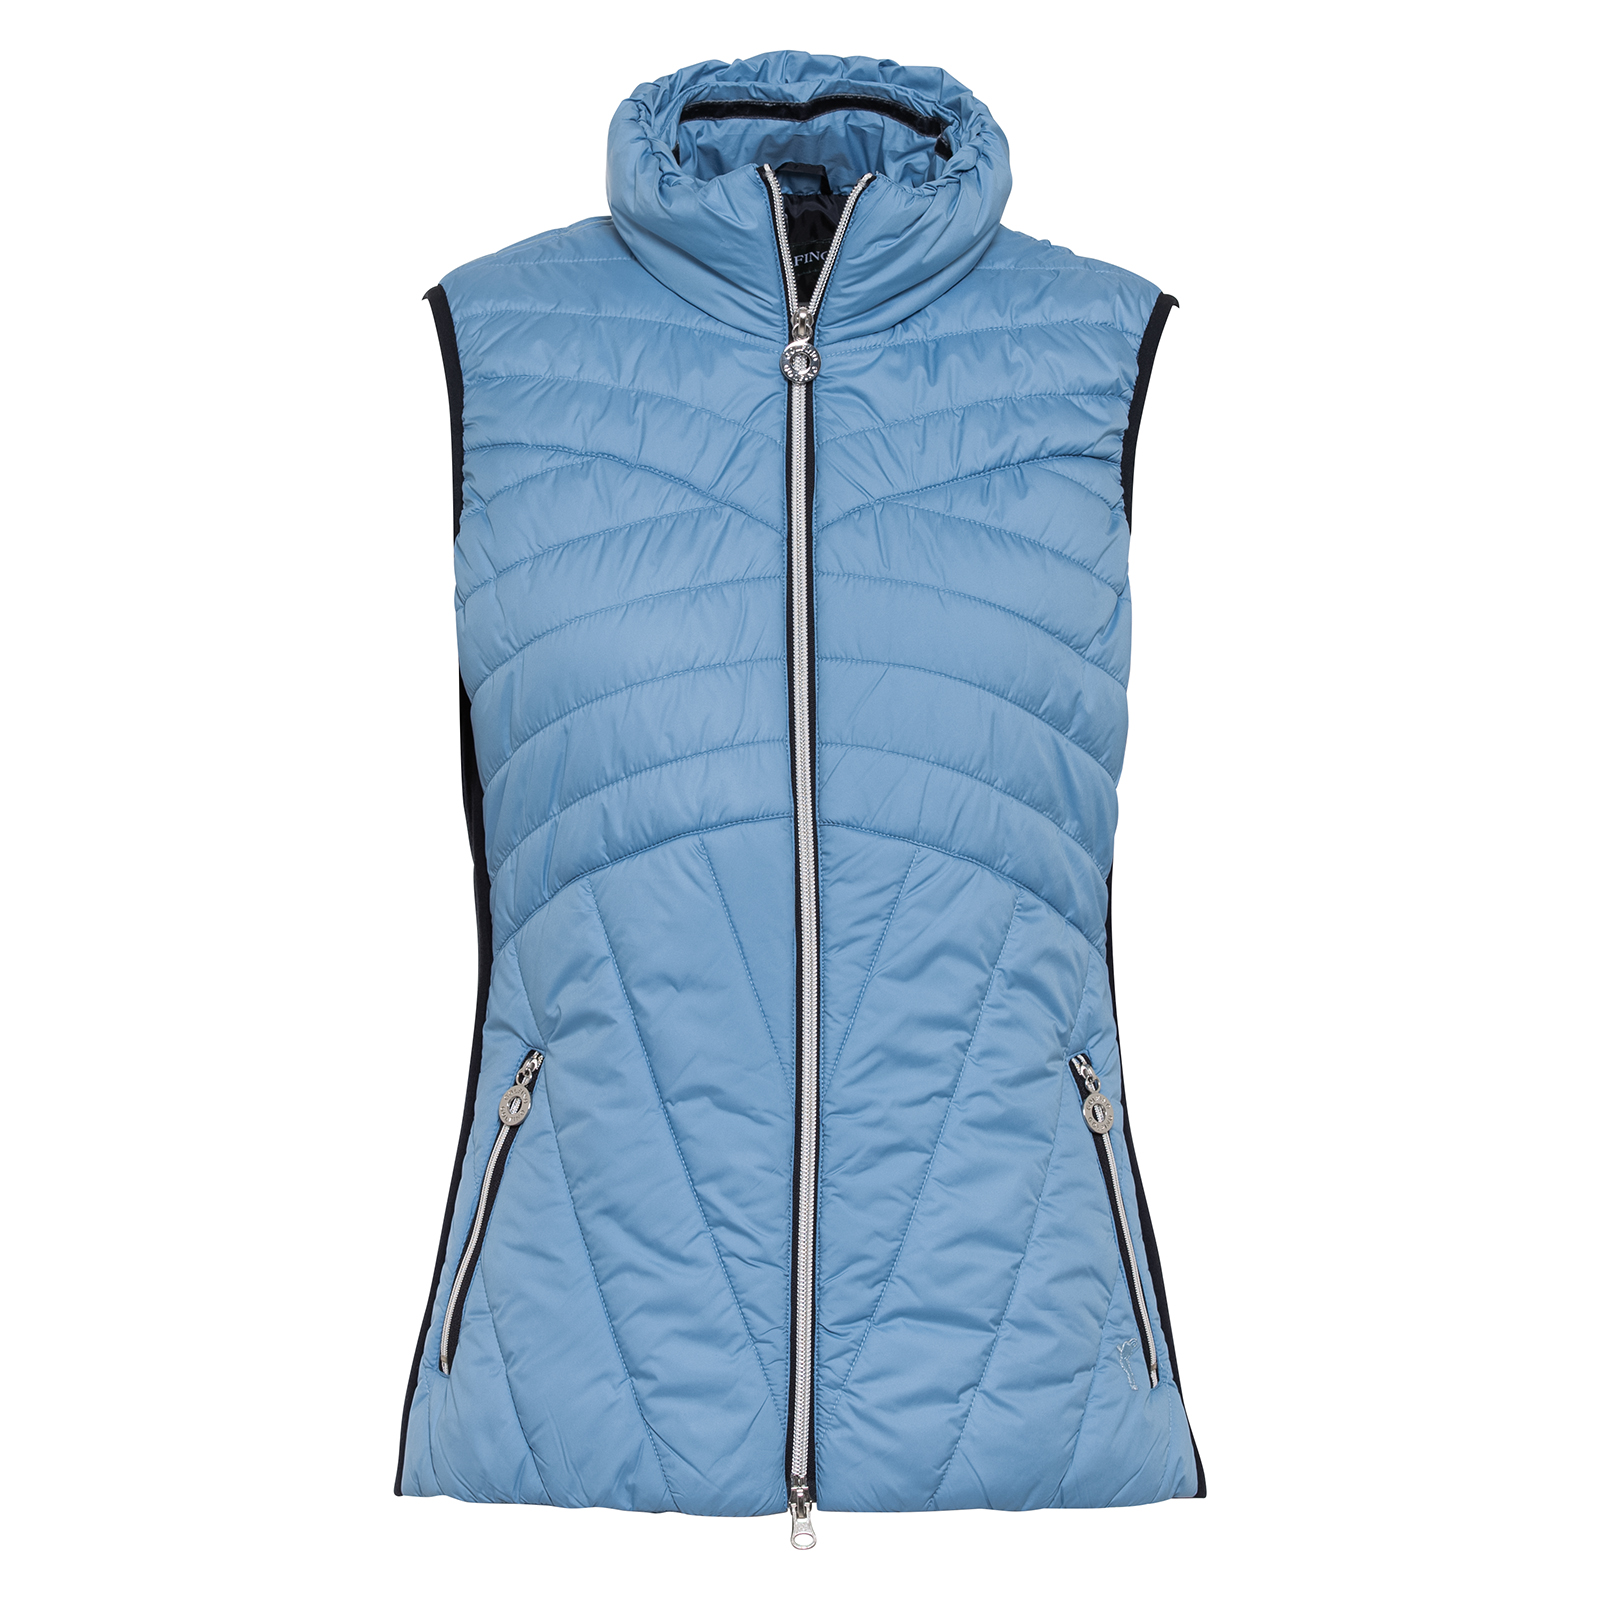 Ladies' windproof golf waistcoat in quilted padded microfibre fabric